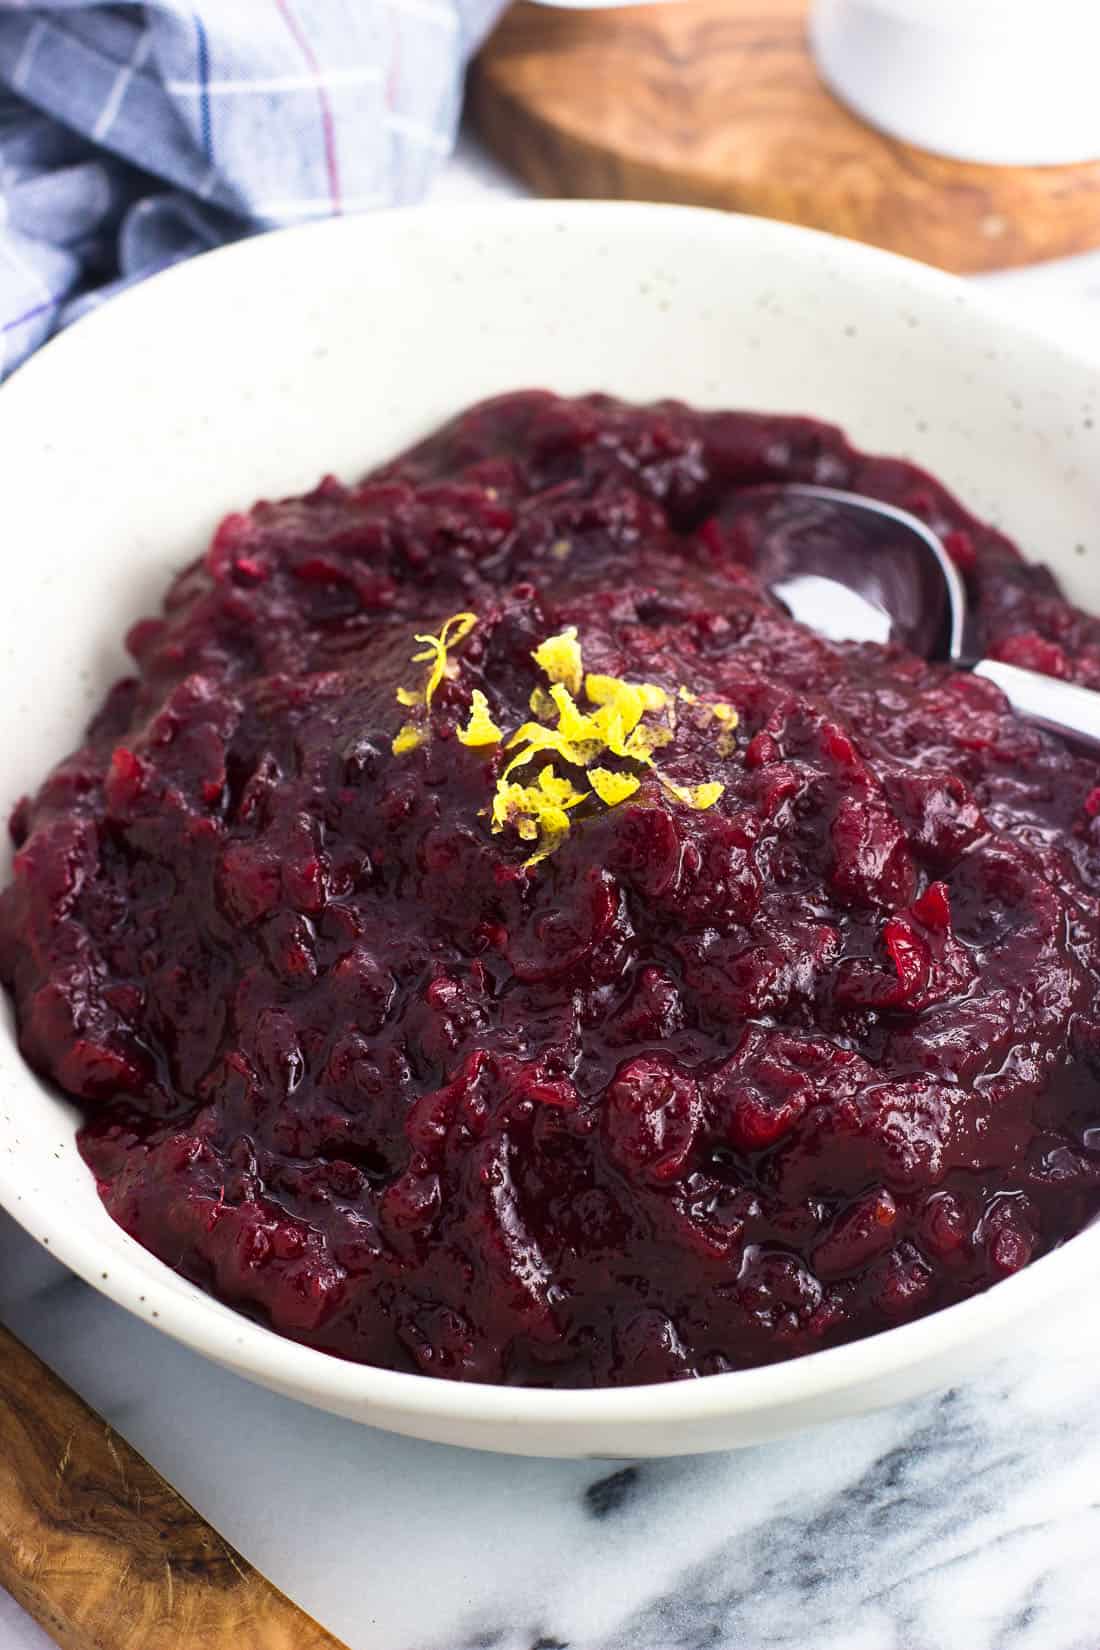 Cranberry sauce in a serving dish with a spoon